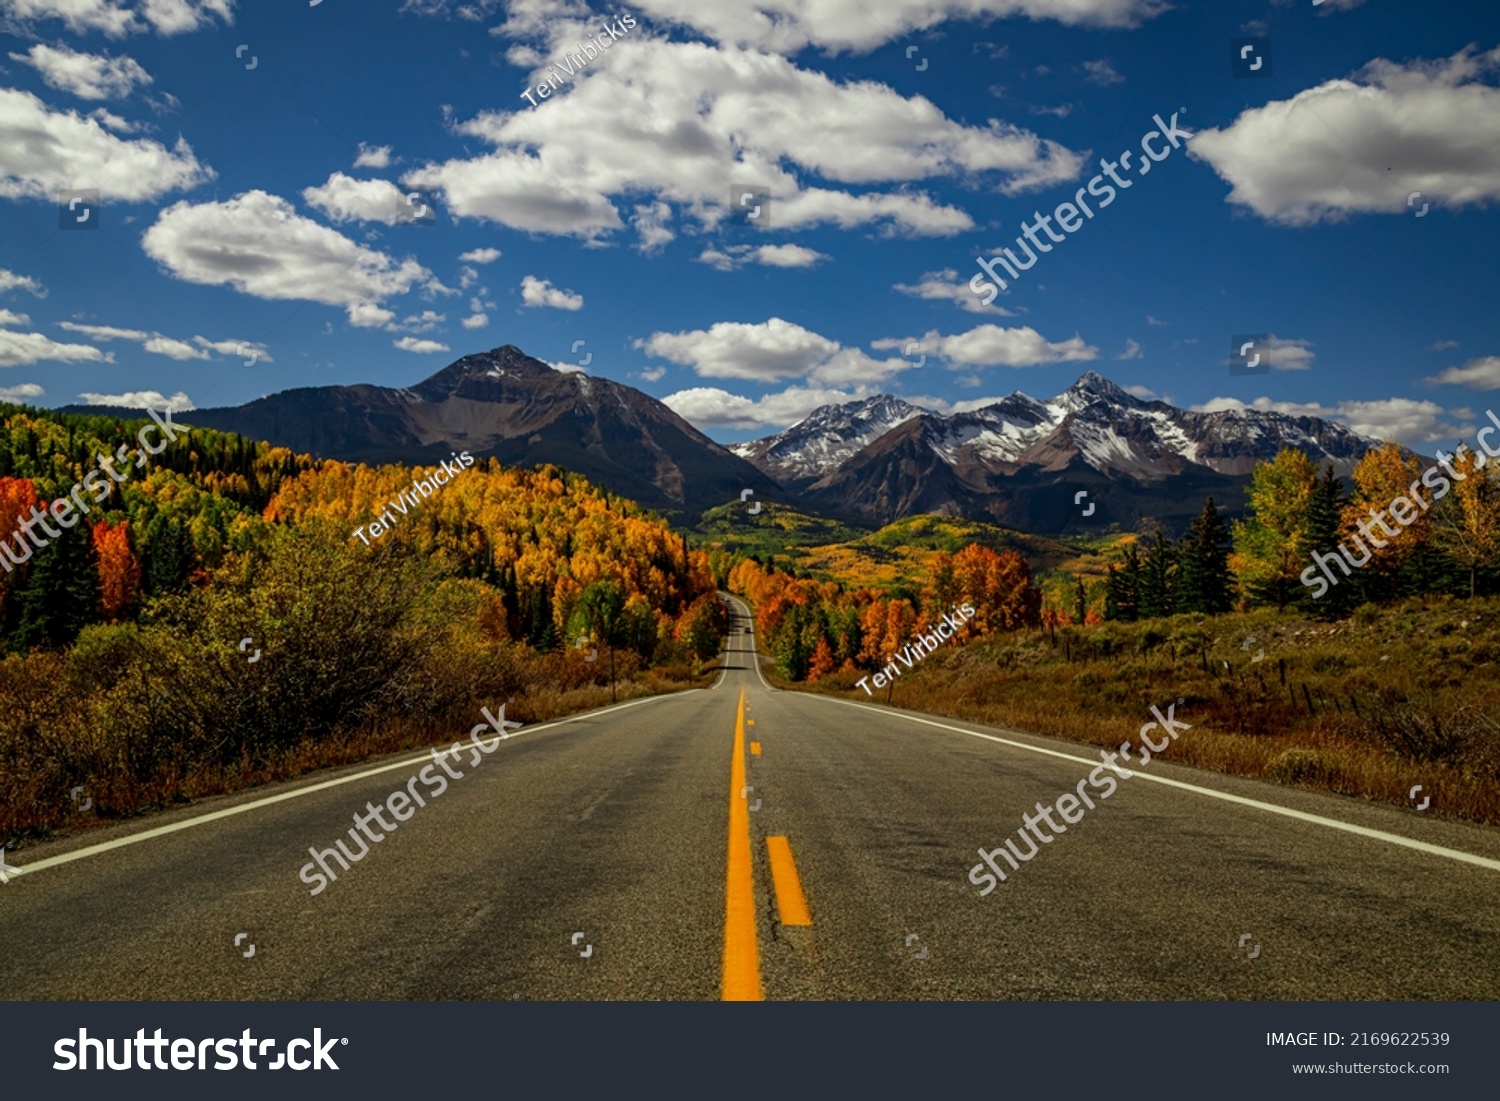 Sunny autumn afternoon scenic drive in the San Juan Mountains near Telluride Colorado with snow covered peaks in distance, yellow and orange Aspen trees near peak fall color - horizontal orientation #2169622539